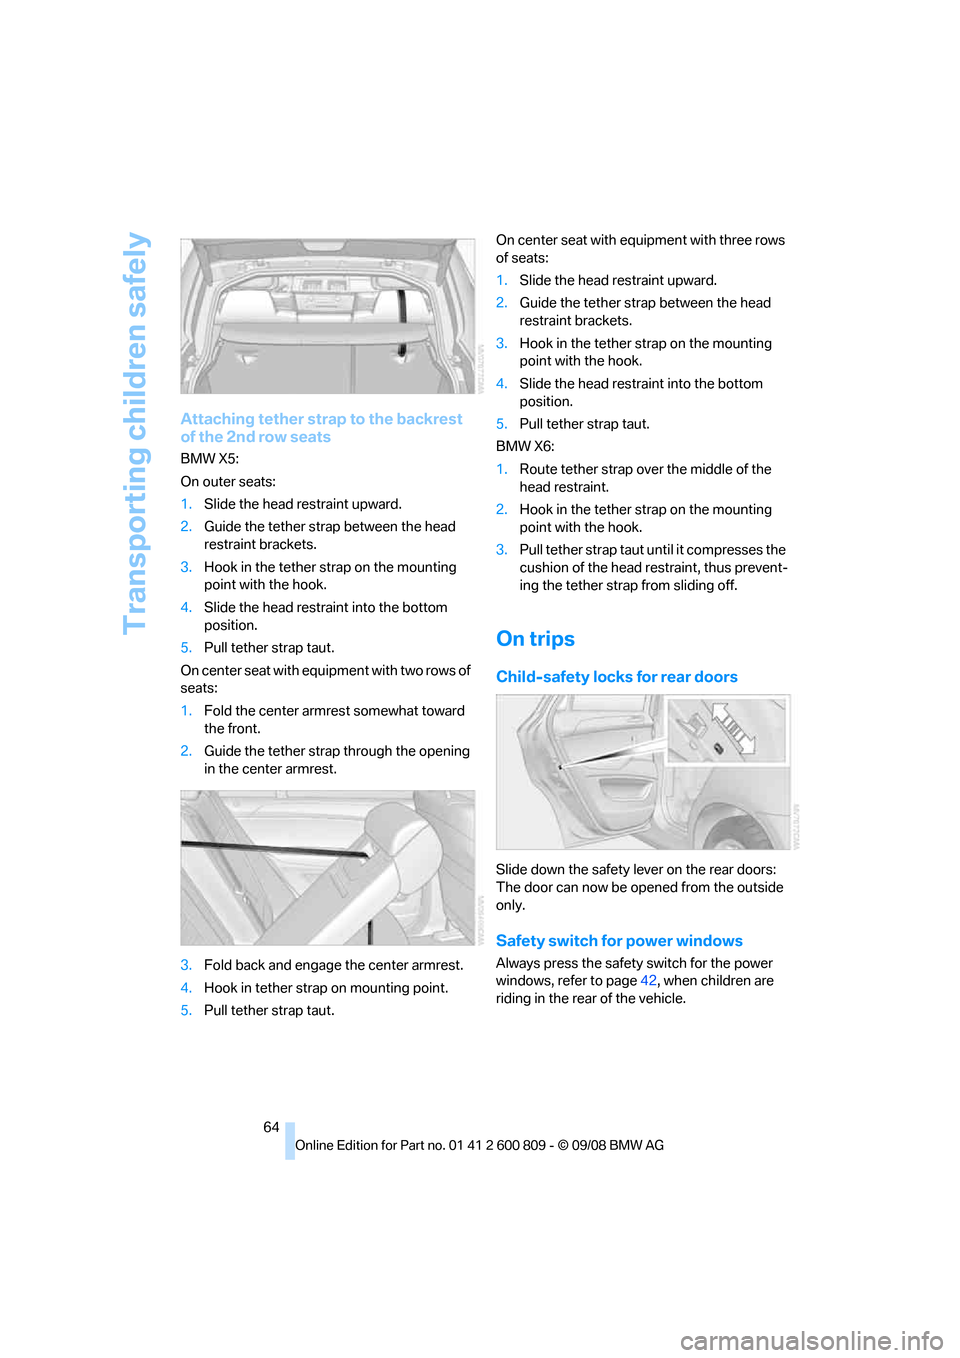 BMW X6 XDRIVE 2009 E71 Repair Manual Transporting children safely
64
Attaching tether strap to the backrest 
of the 2nd row seats
BMW X5:
On outer seats:
1.Slide the head re straint upward.
2. Guide the tether stra p between the head 
re